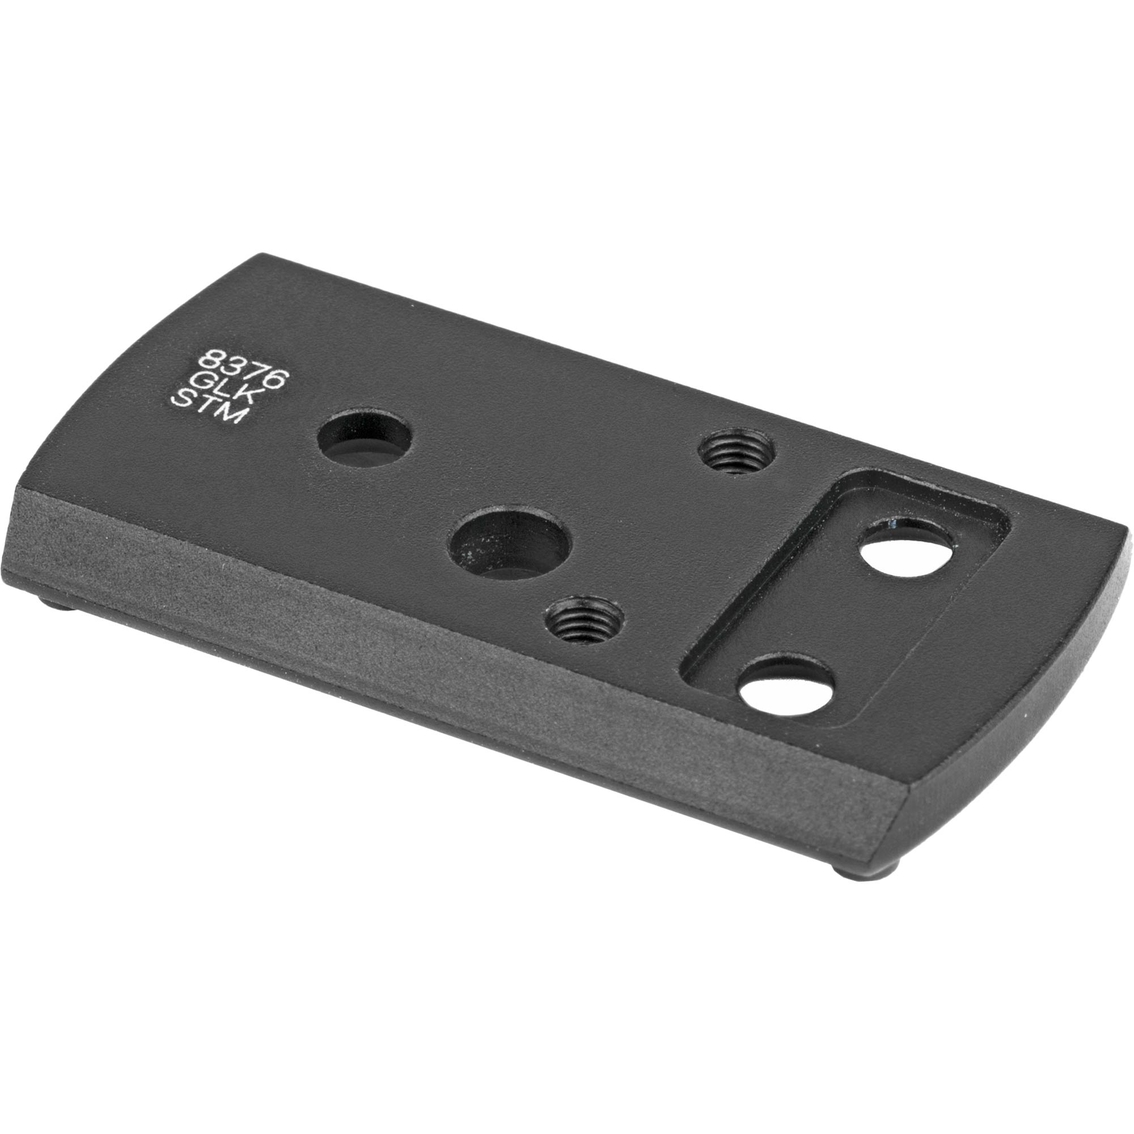 Burris FastFire Mount, fits all Glocks and Beretta PX4 Storm, Matte - Image 2 of 2